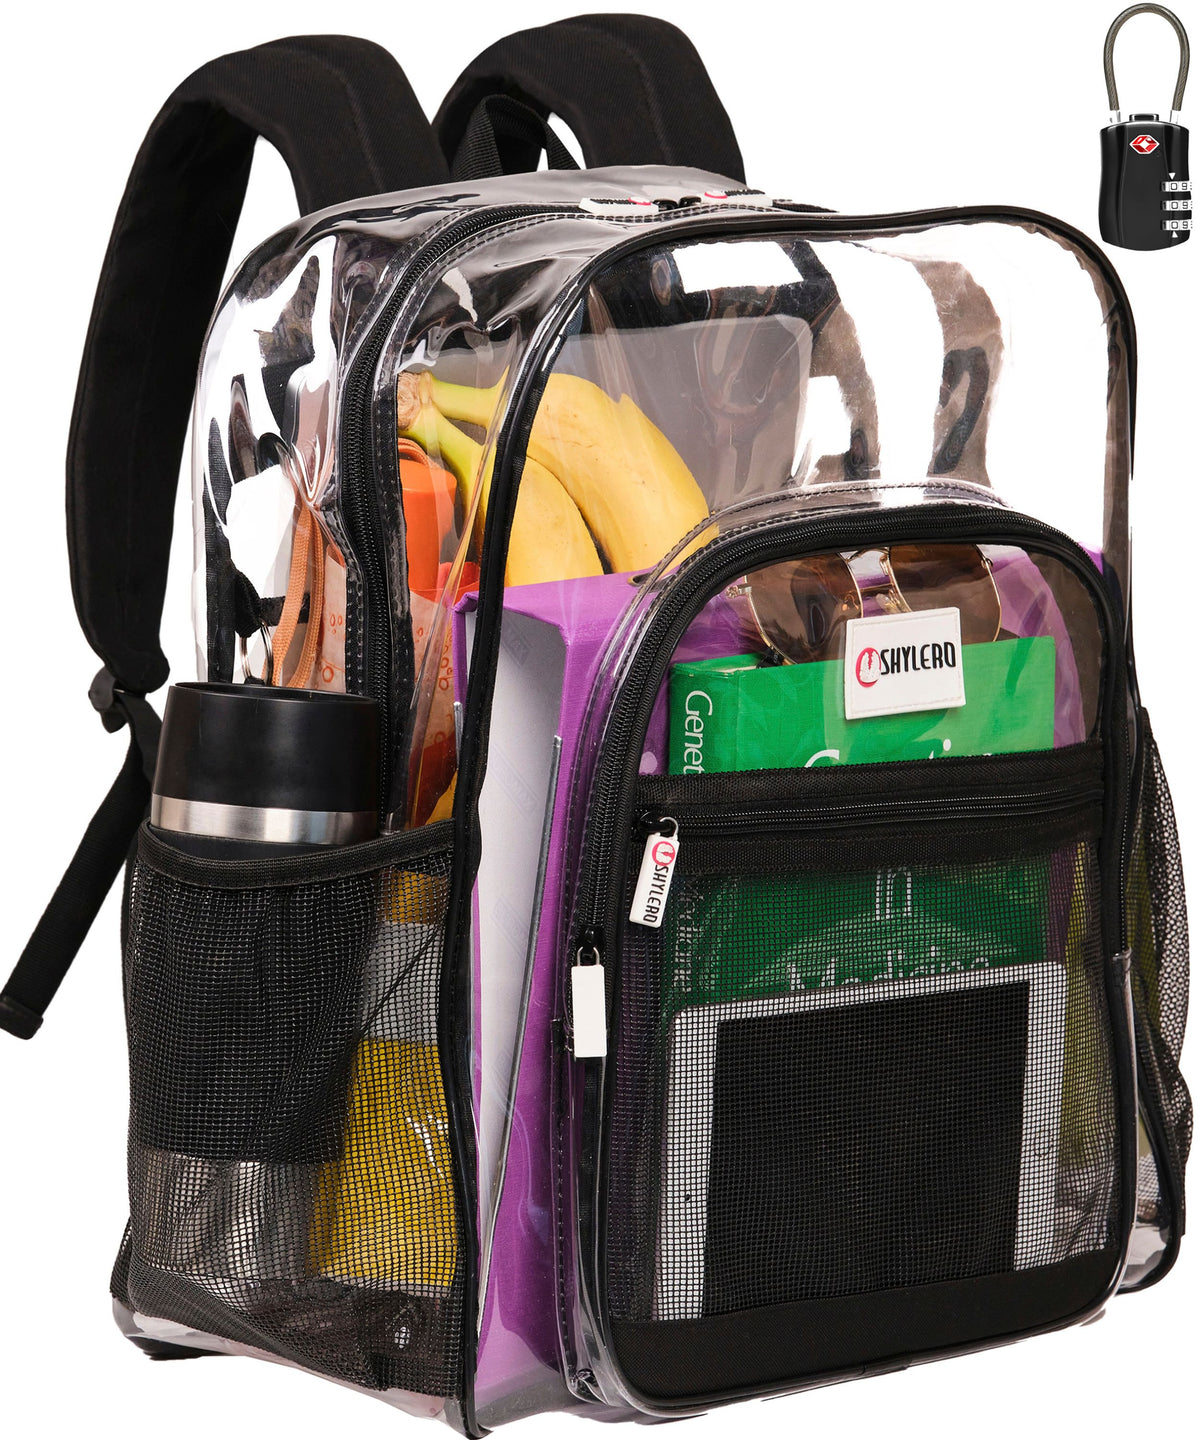 Clear Backpack For Work and School Backpack XL | TSA Lock | H18" x W14" x D8" (45cm x 35cm x 20cm) | 32 L | Black Rhino